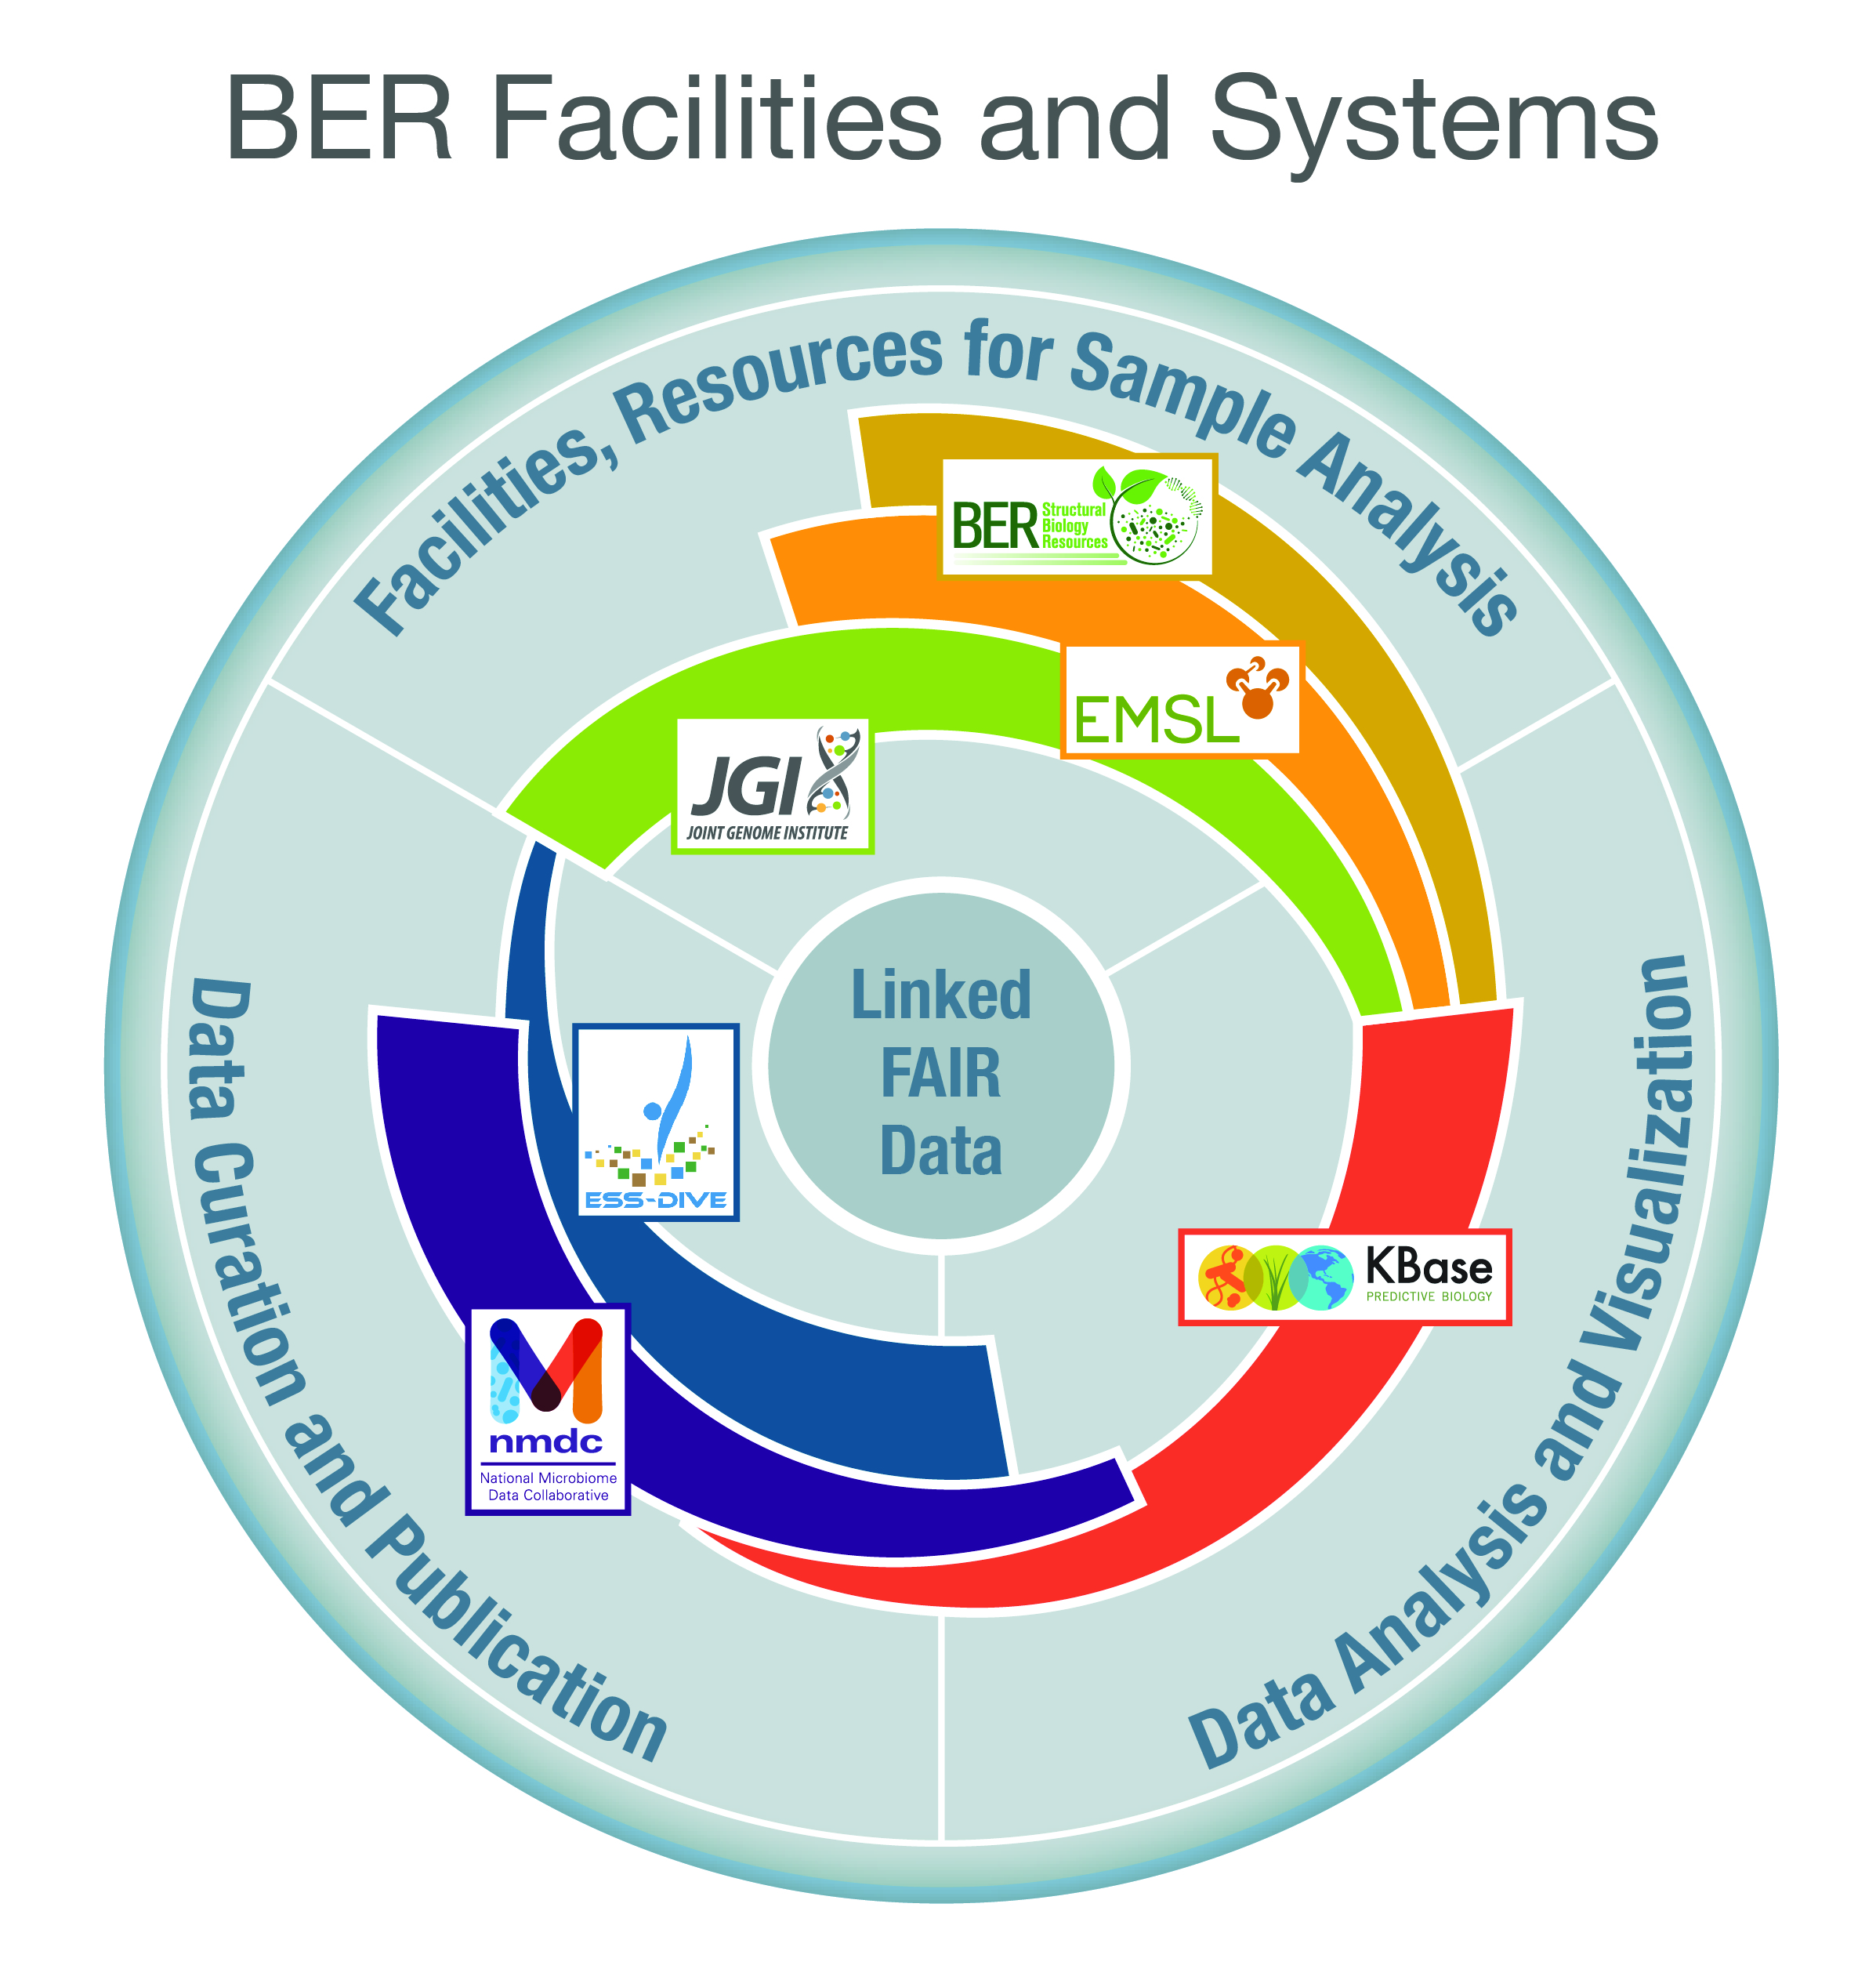 KBase is part of the by Department of Energy in the Biological and Environmental Research research program that sponsors user facilities and resources such as BER (BER Structural Biology Resources), JGI (Joint Genome Institute - user facility for sequencing and advance genomic research), EMSL (Environmental Molecular Sciences Laboratory - user facility, space, expertise, equipment), NMDC (National Microcrobiome Data Collaborative - microbiome metadata standards and standardized workflows), ESS-DIVE (Environmental System Science Data Infrastructure for a Virtual Ecosystem - data repository for earth and environmental sciences). KBase - part of the data analysis and visualization and publication… 